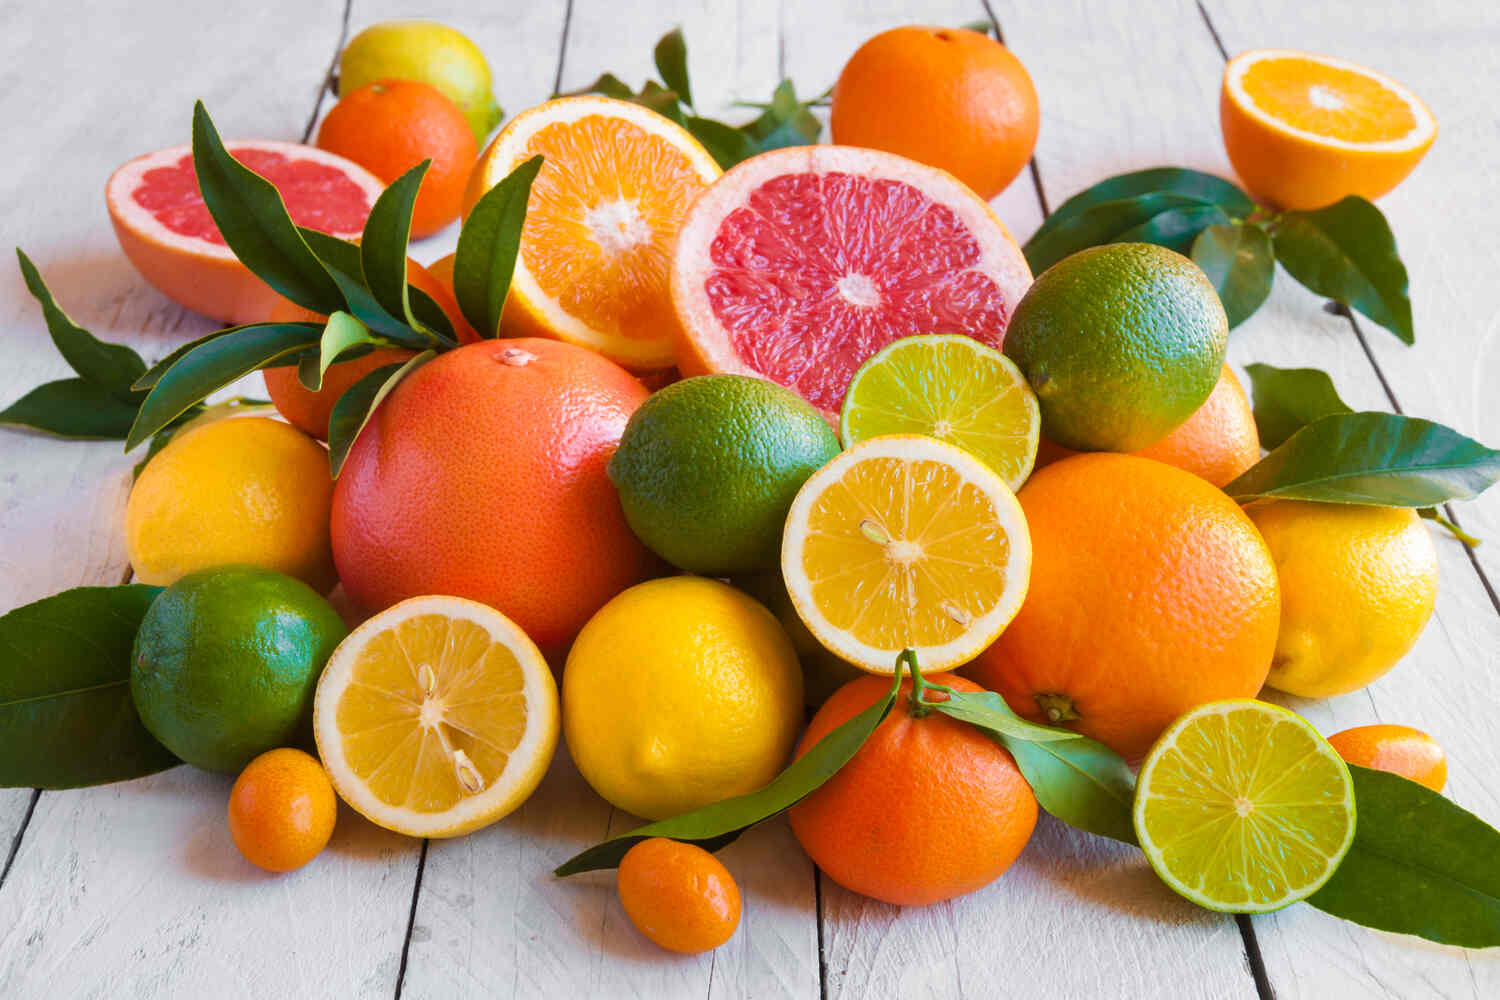 What are citrus fruits